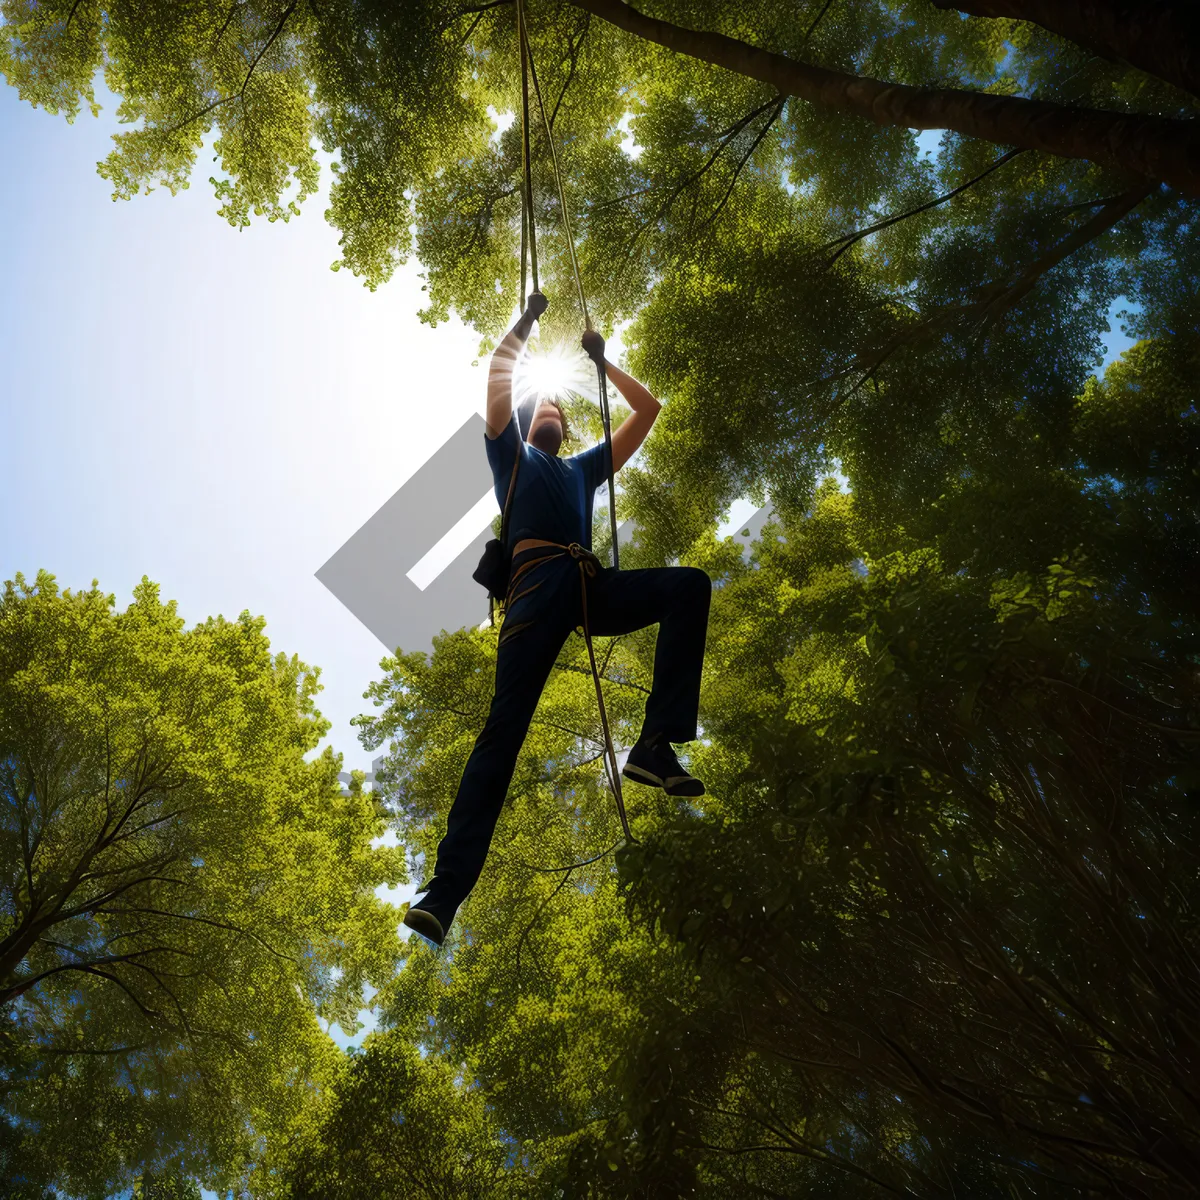 Picture of Joyful Sky Swing Action with Silhouette